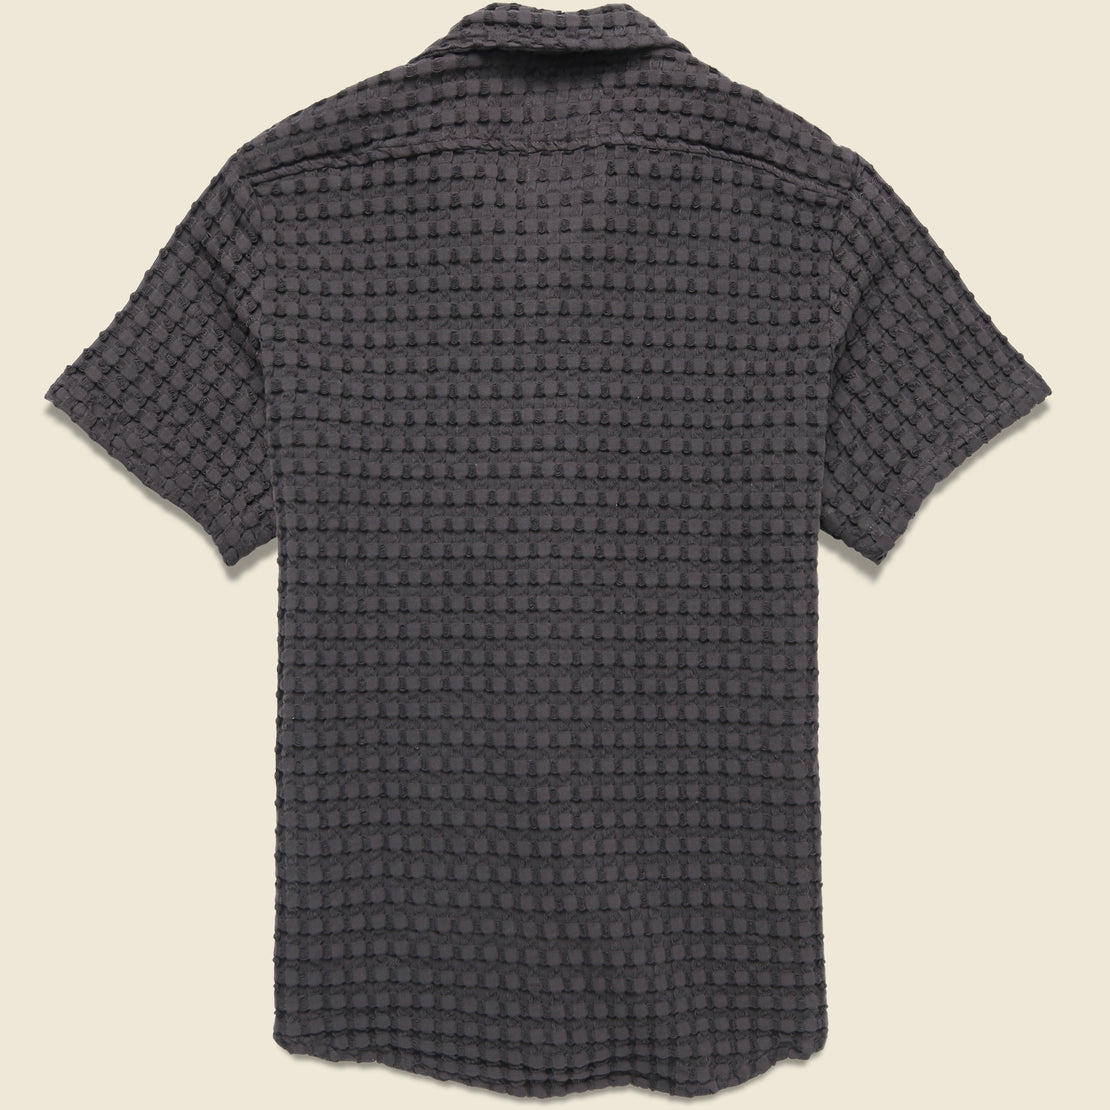 Waffle Terry Shirt - Nearly Black - OAS - STAG Provisions - Tops - S/S Knit